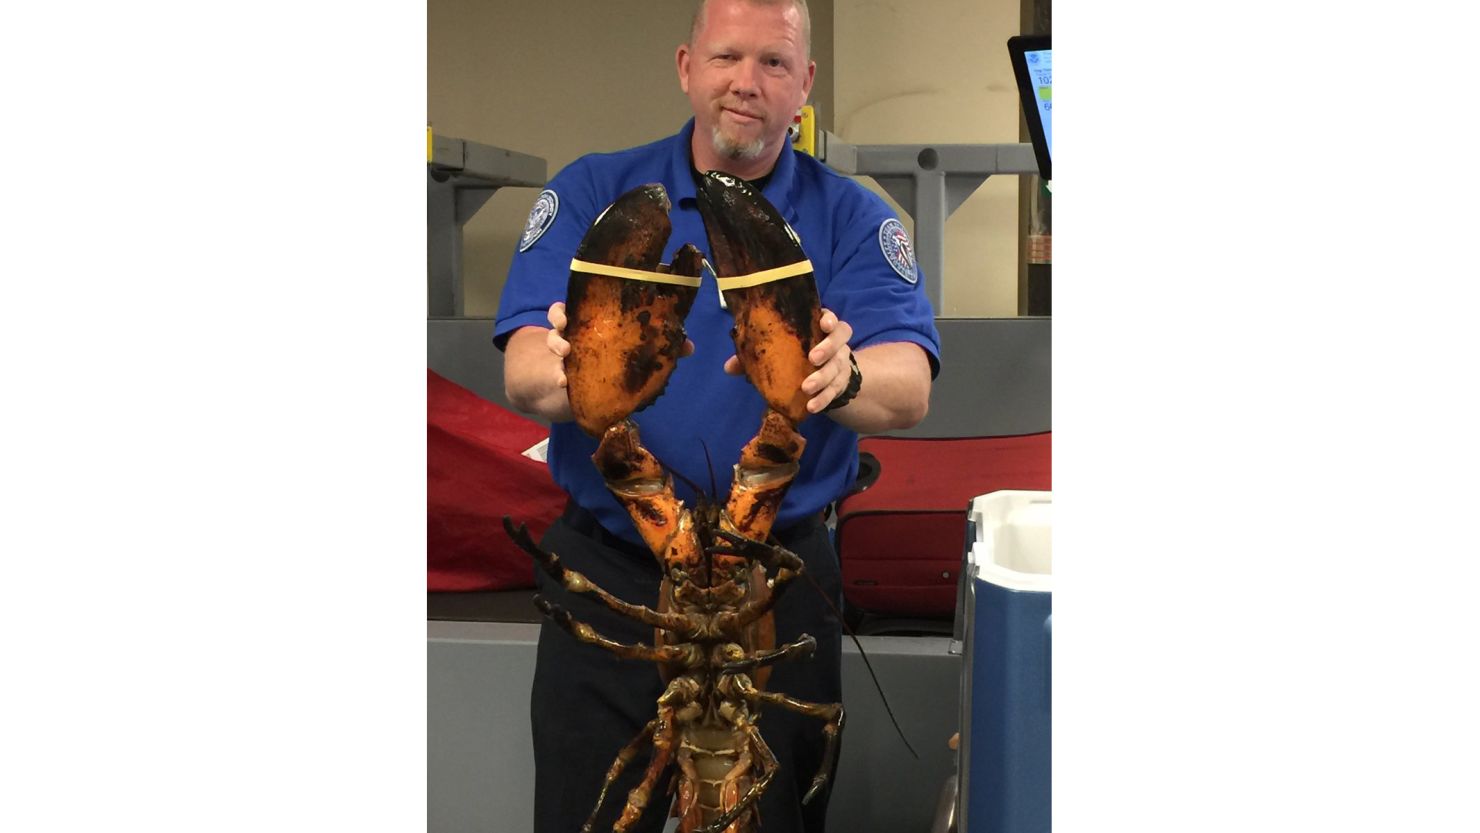 TSA agents at Logan Airport found a 20-pound lobster in a checked bag.